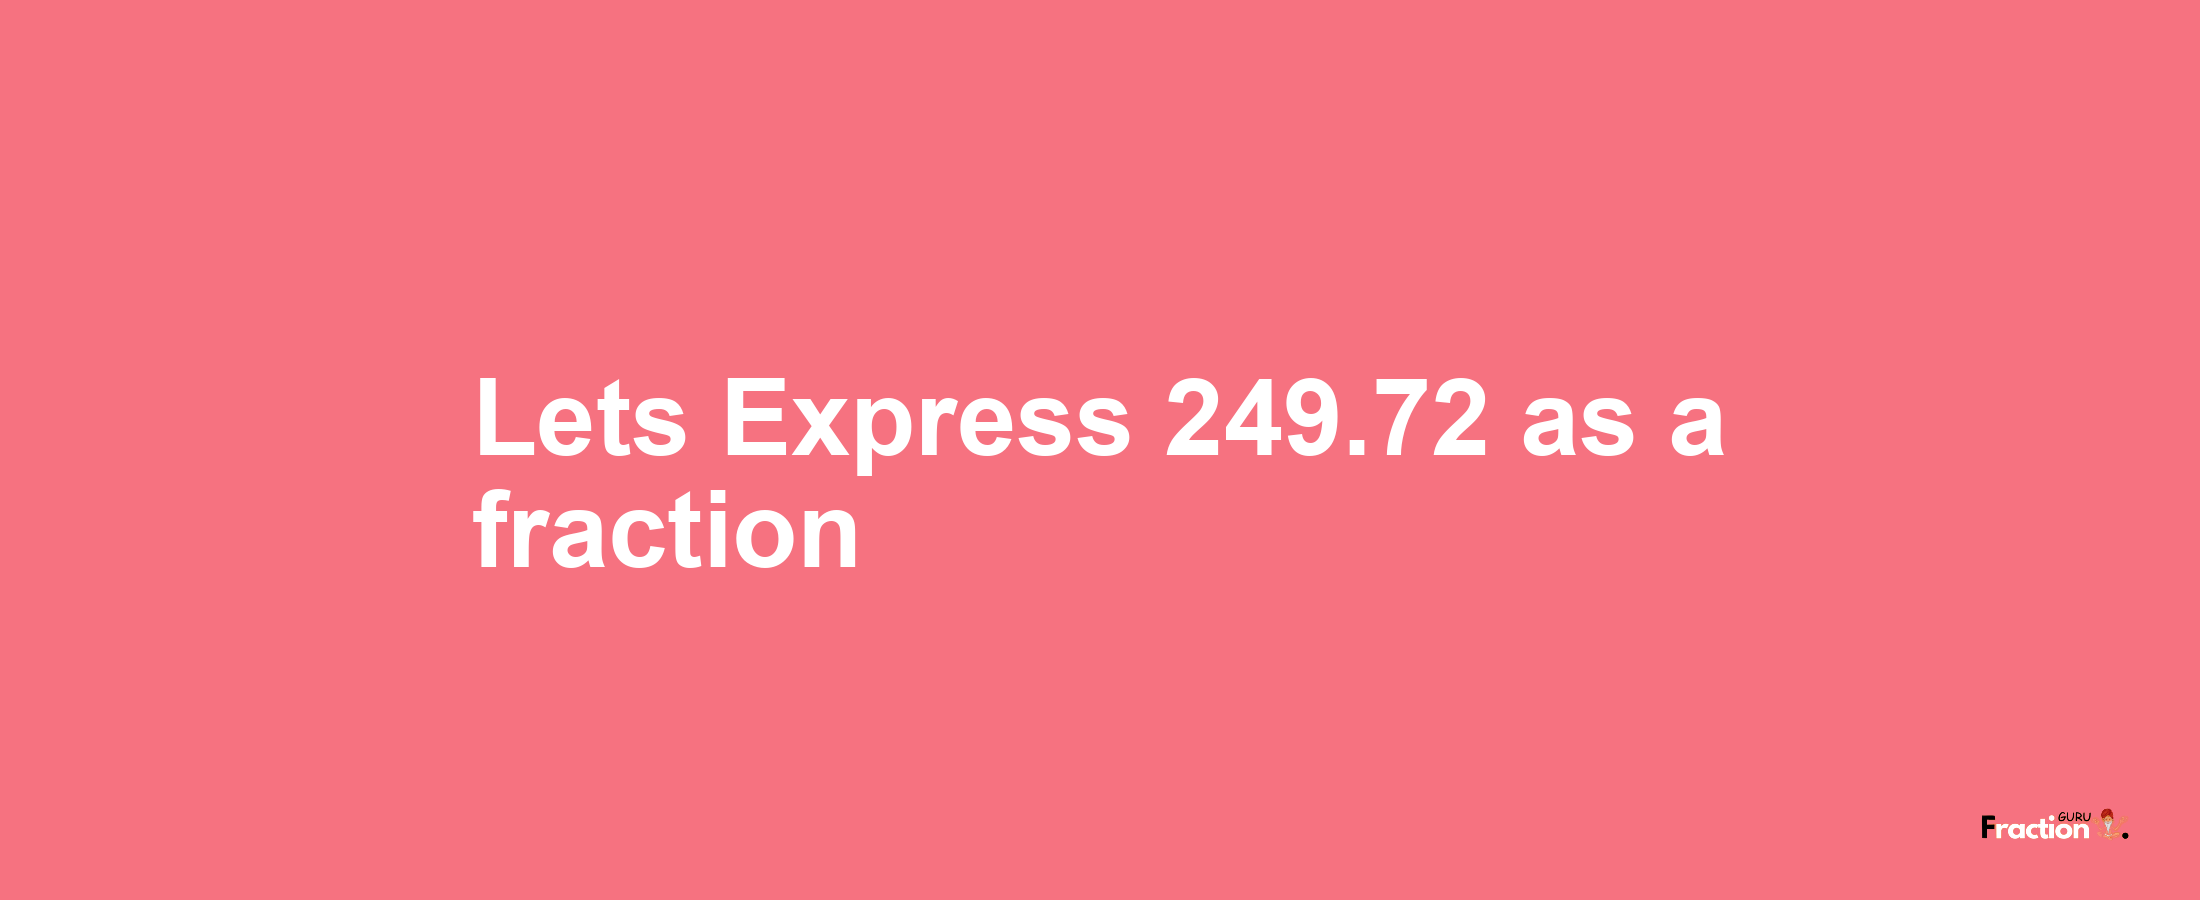 Lets Express 249.72 as afraction